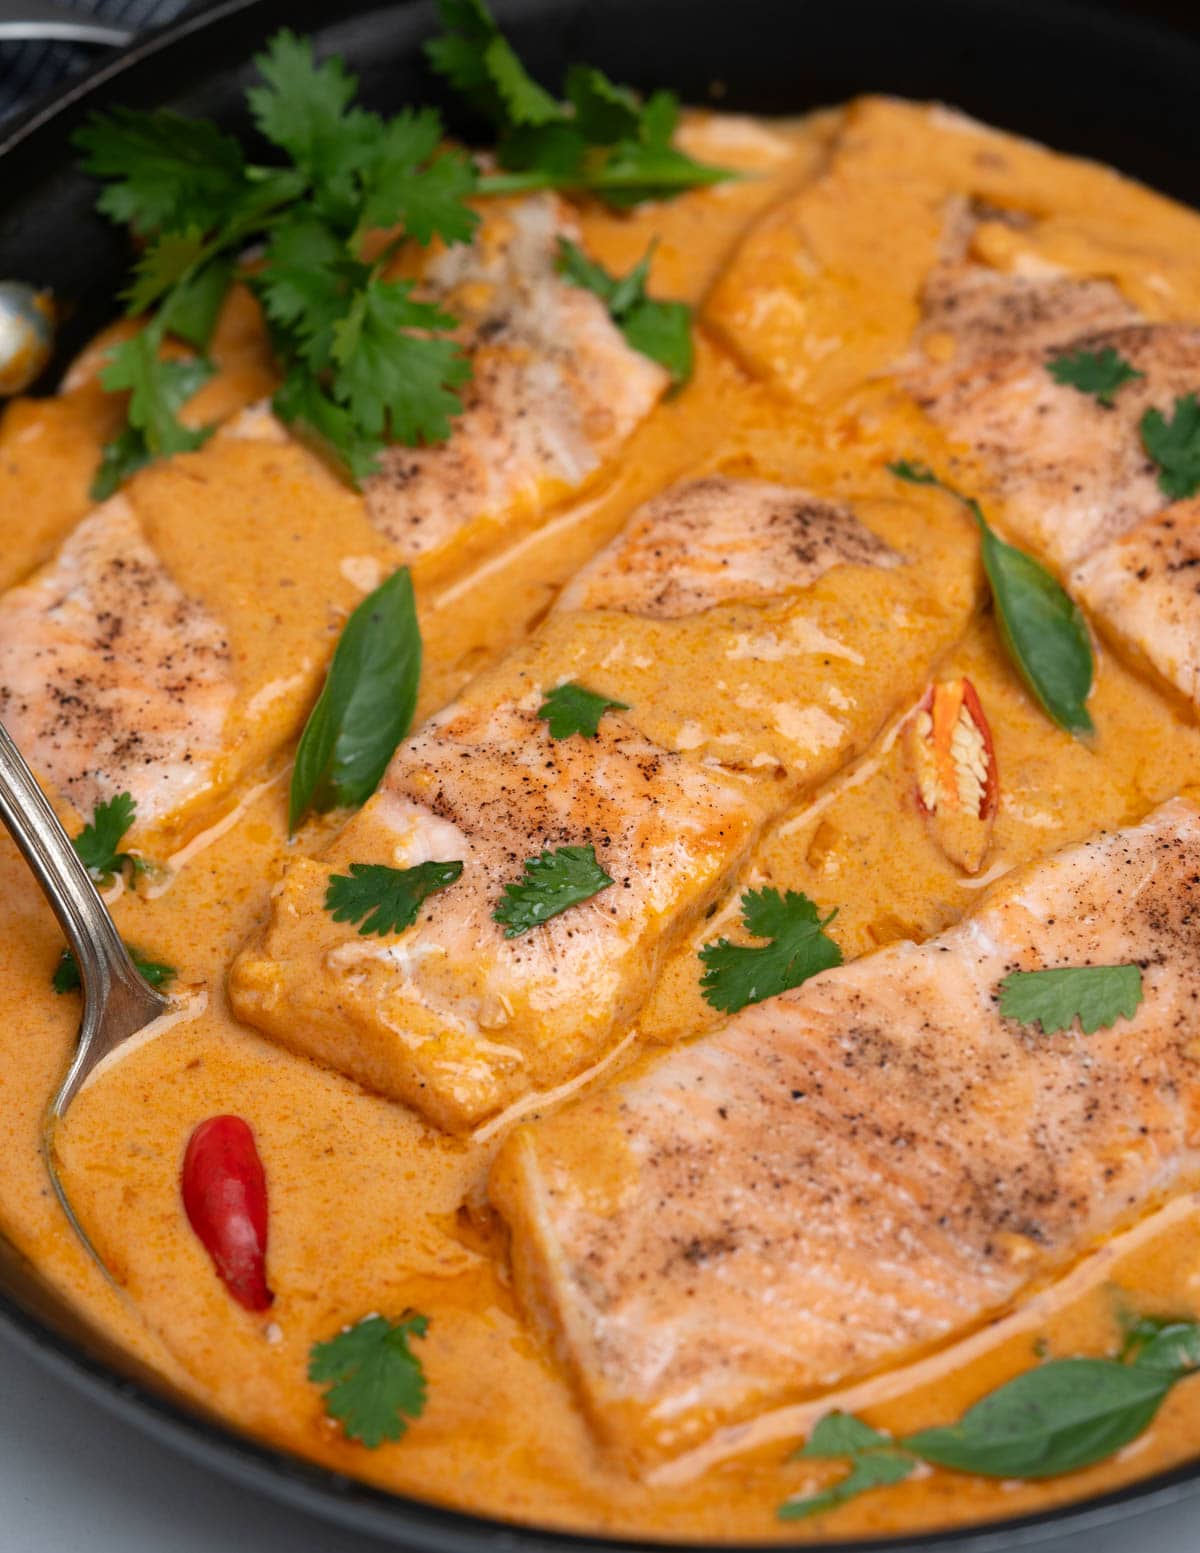 Salmon fillets inn a sea of creamy rich golden coconut curry sauce and garnished with cilantro, Thai basil and chili peppers.